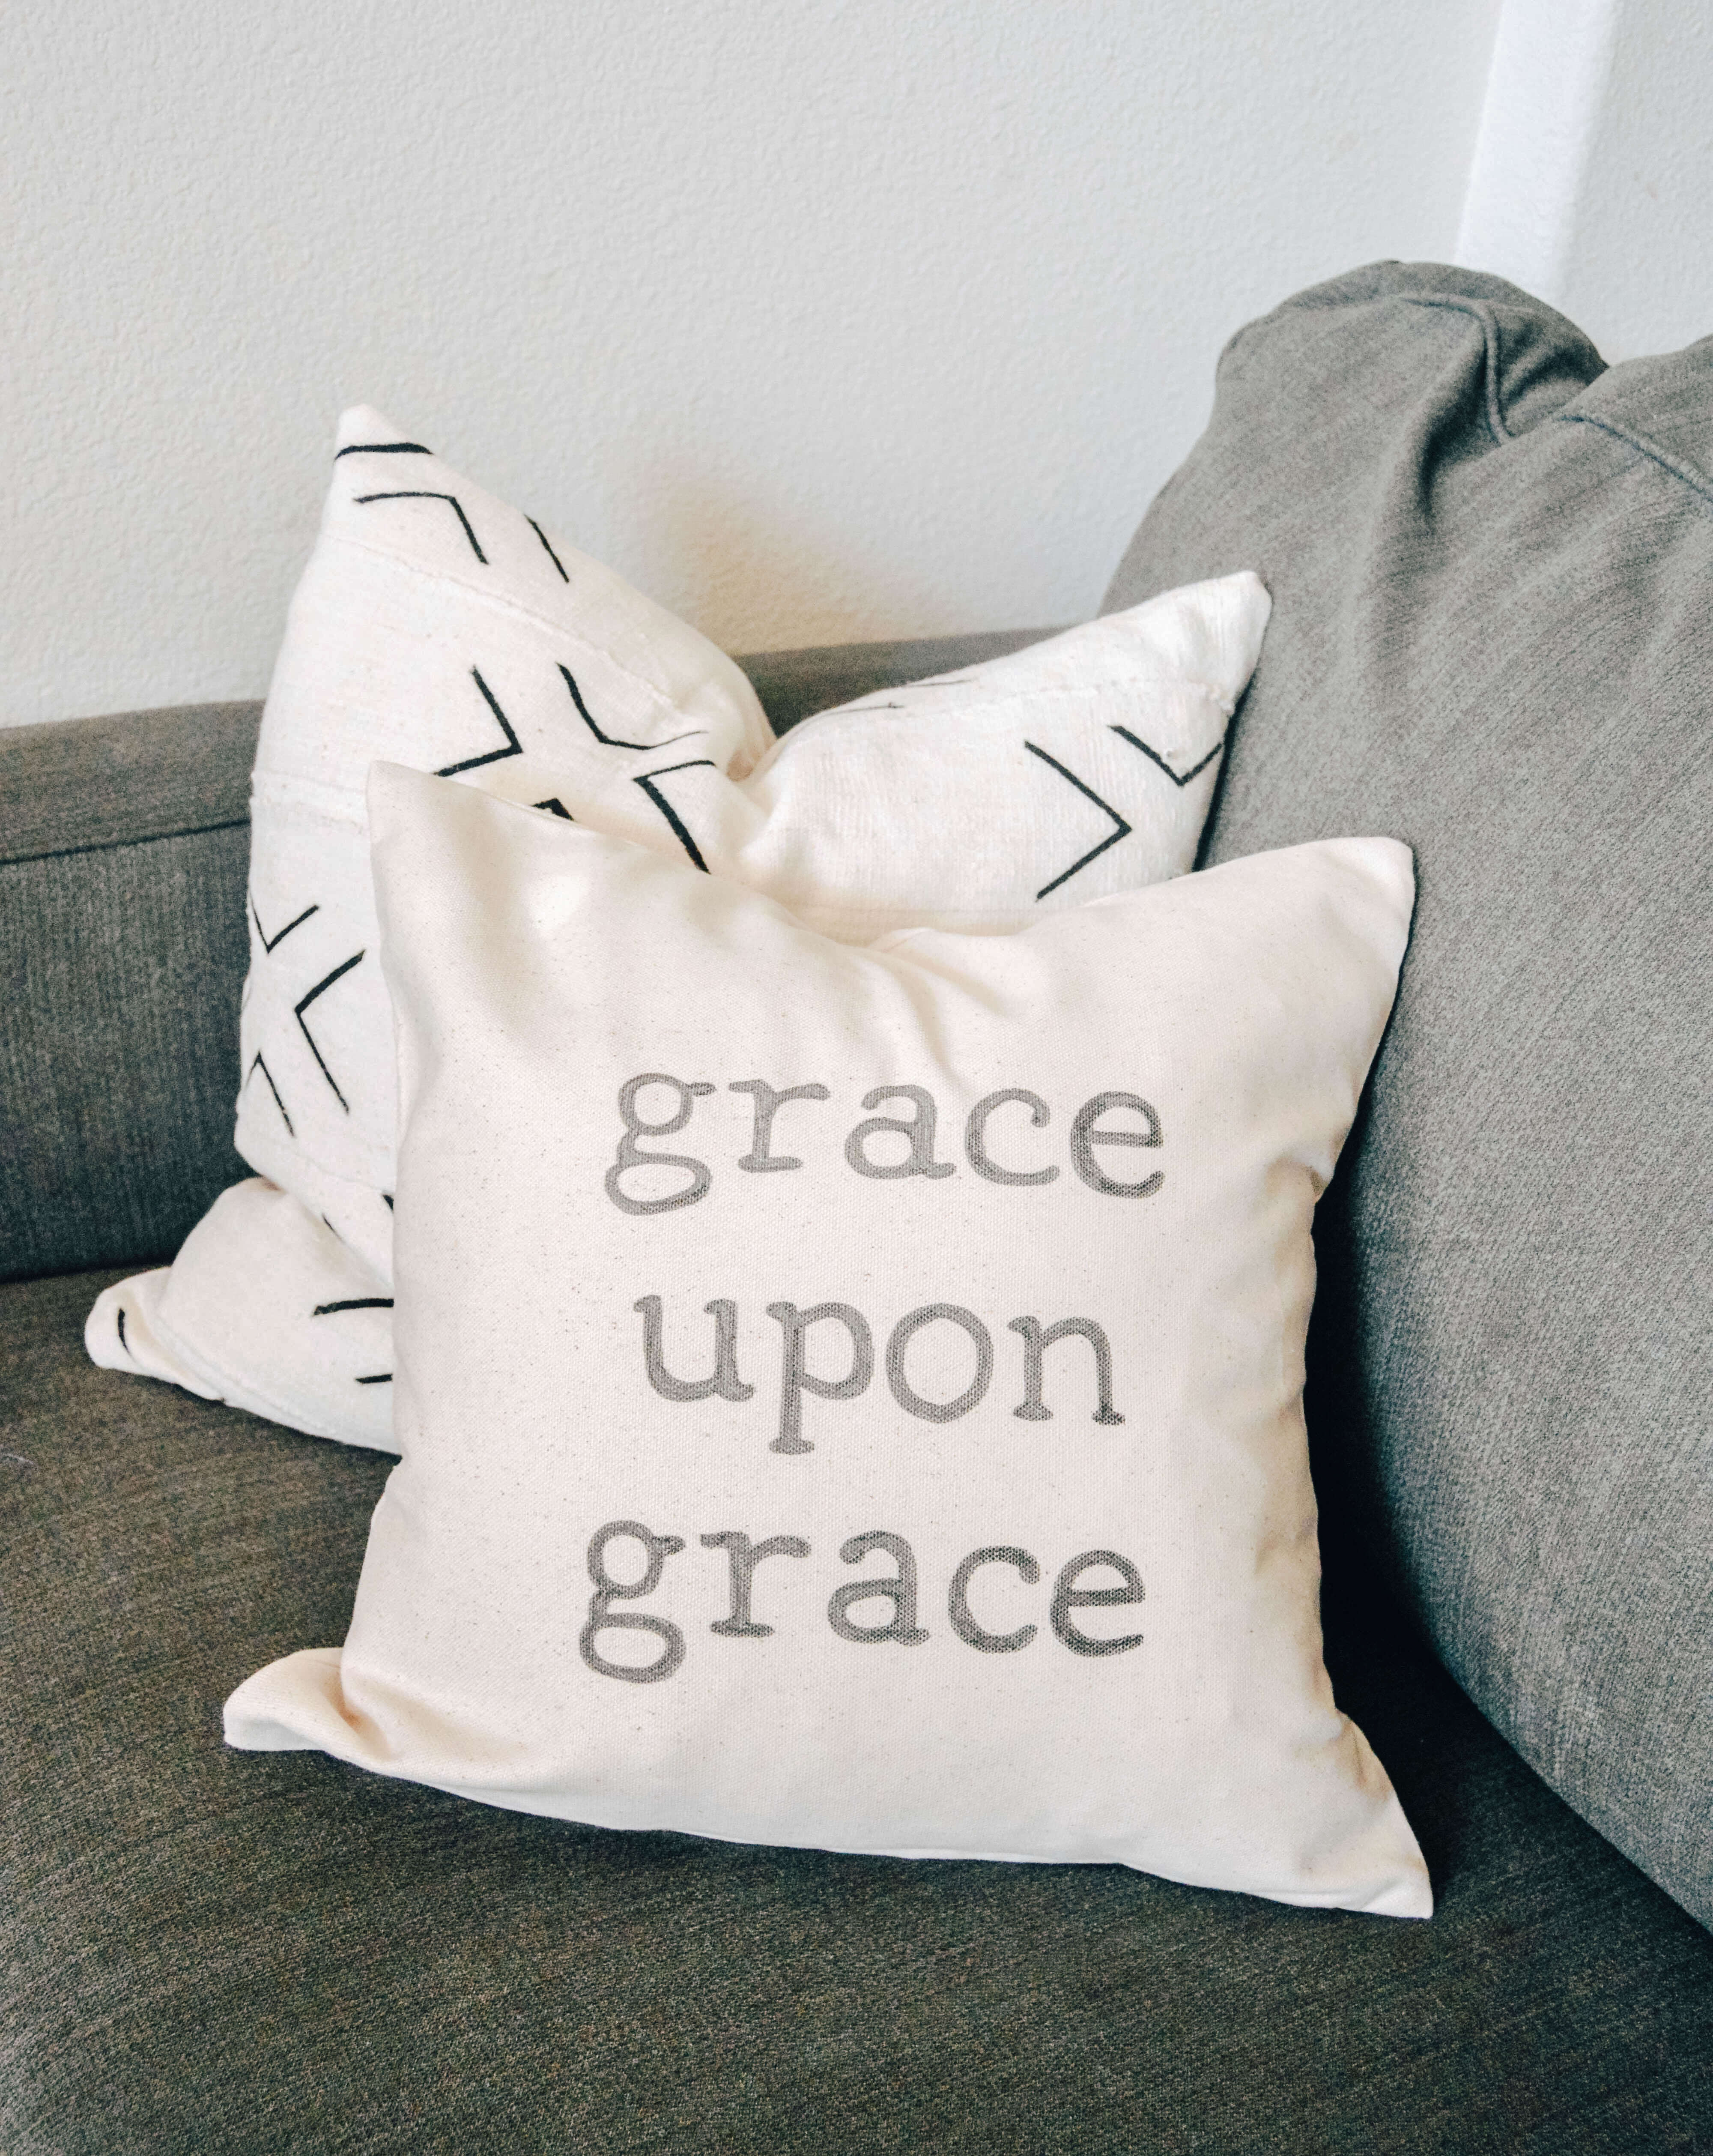 DIY Throw Pillow Covers. How to make your own DIY farmhouse pillow covers. Farmhouse pillow cover tutorial. Grace upon grace pillow cover. 